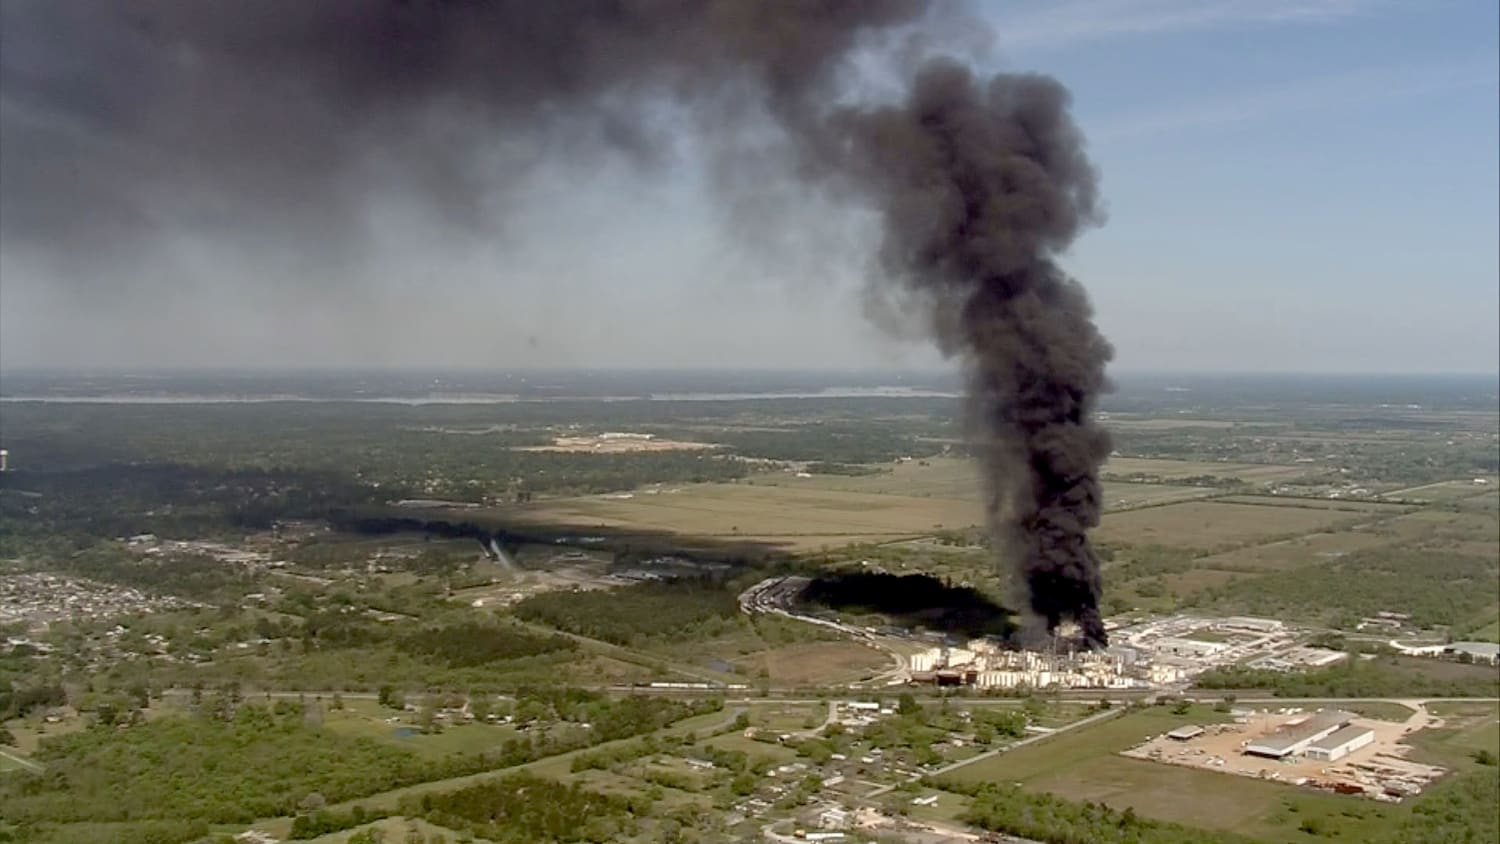 Flipboard: At least 1 dead, 2 injured in Houston area chemical plant fire